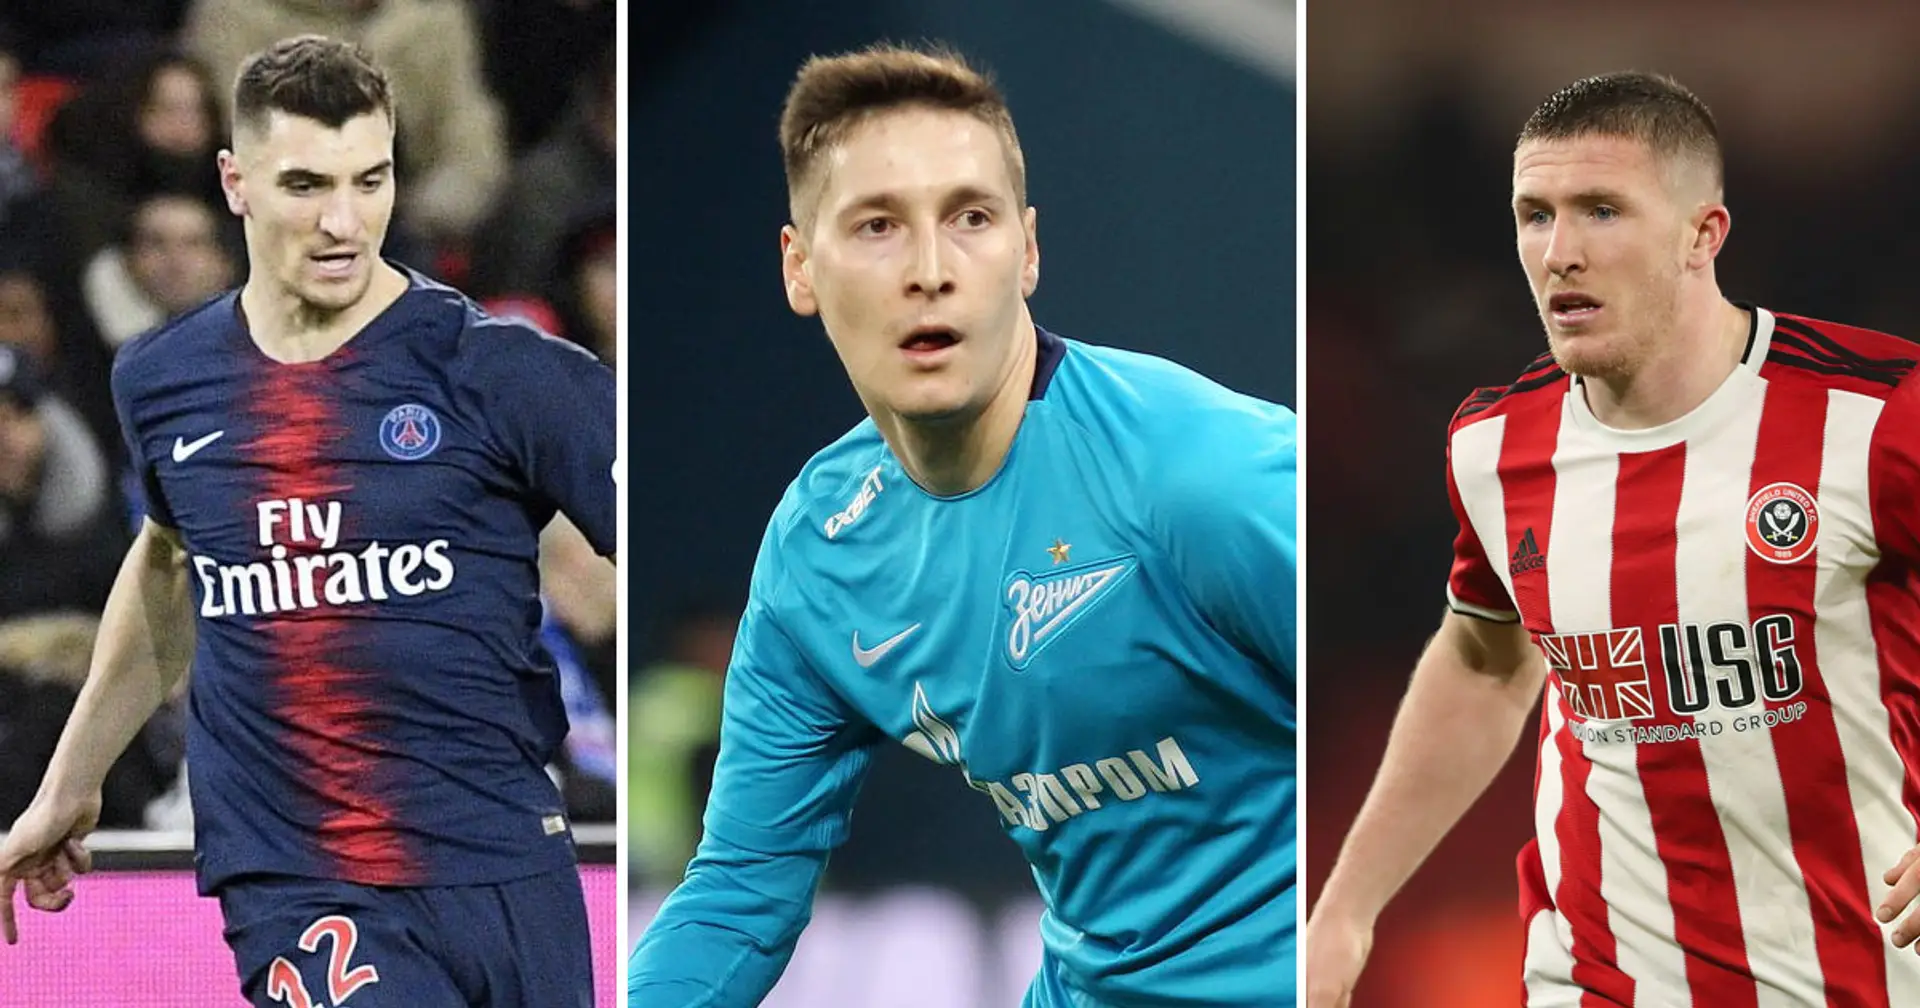 Free agents will be in demand: Here are 3 players Arsenal can sign for nothing in summer